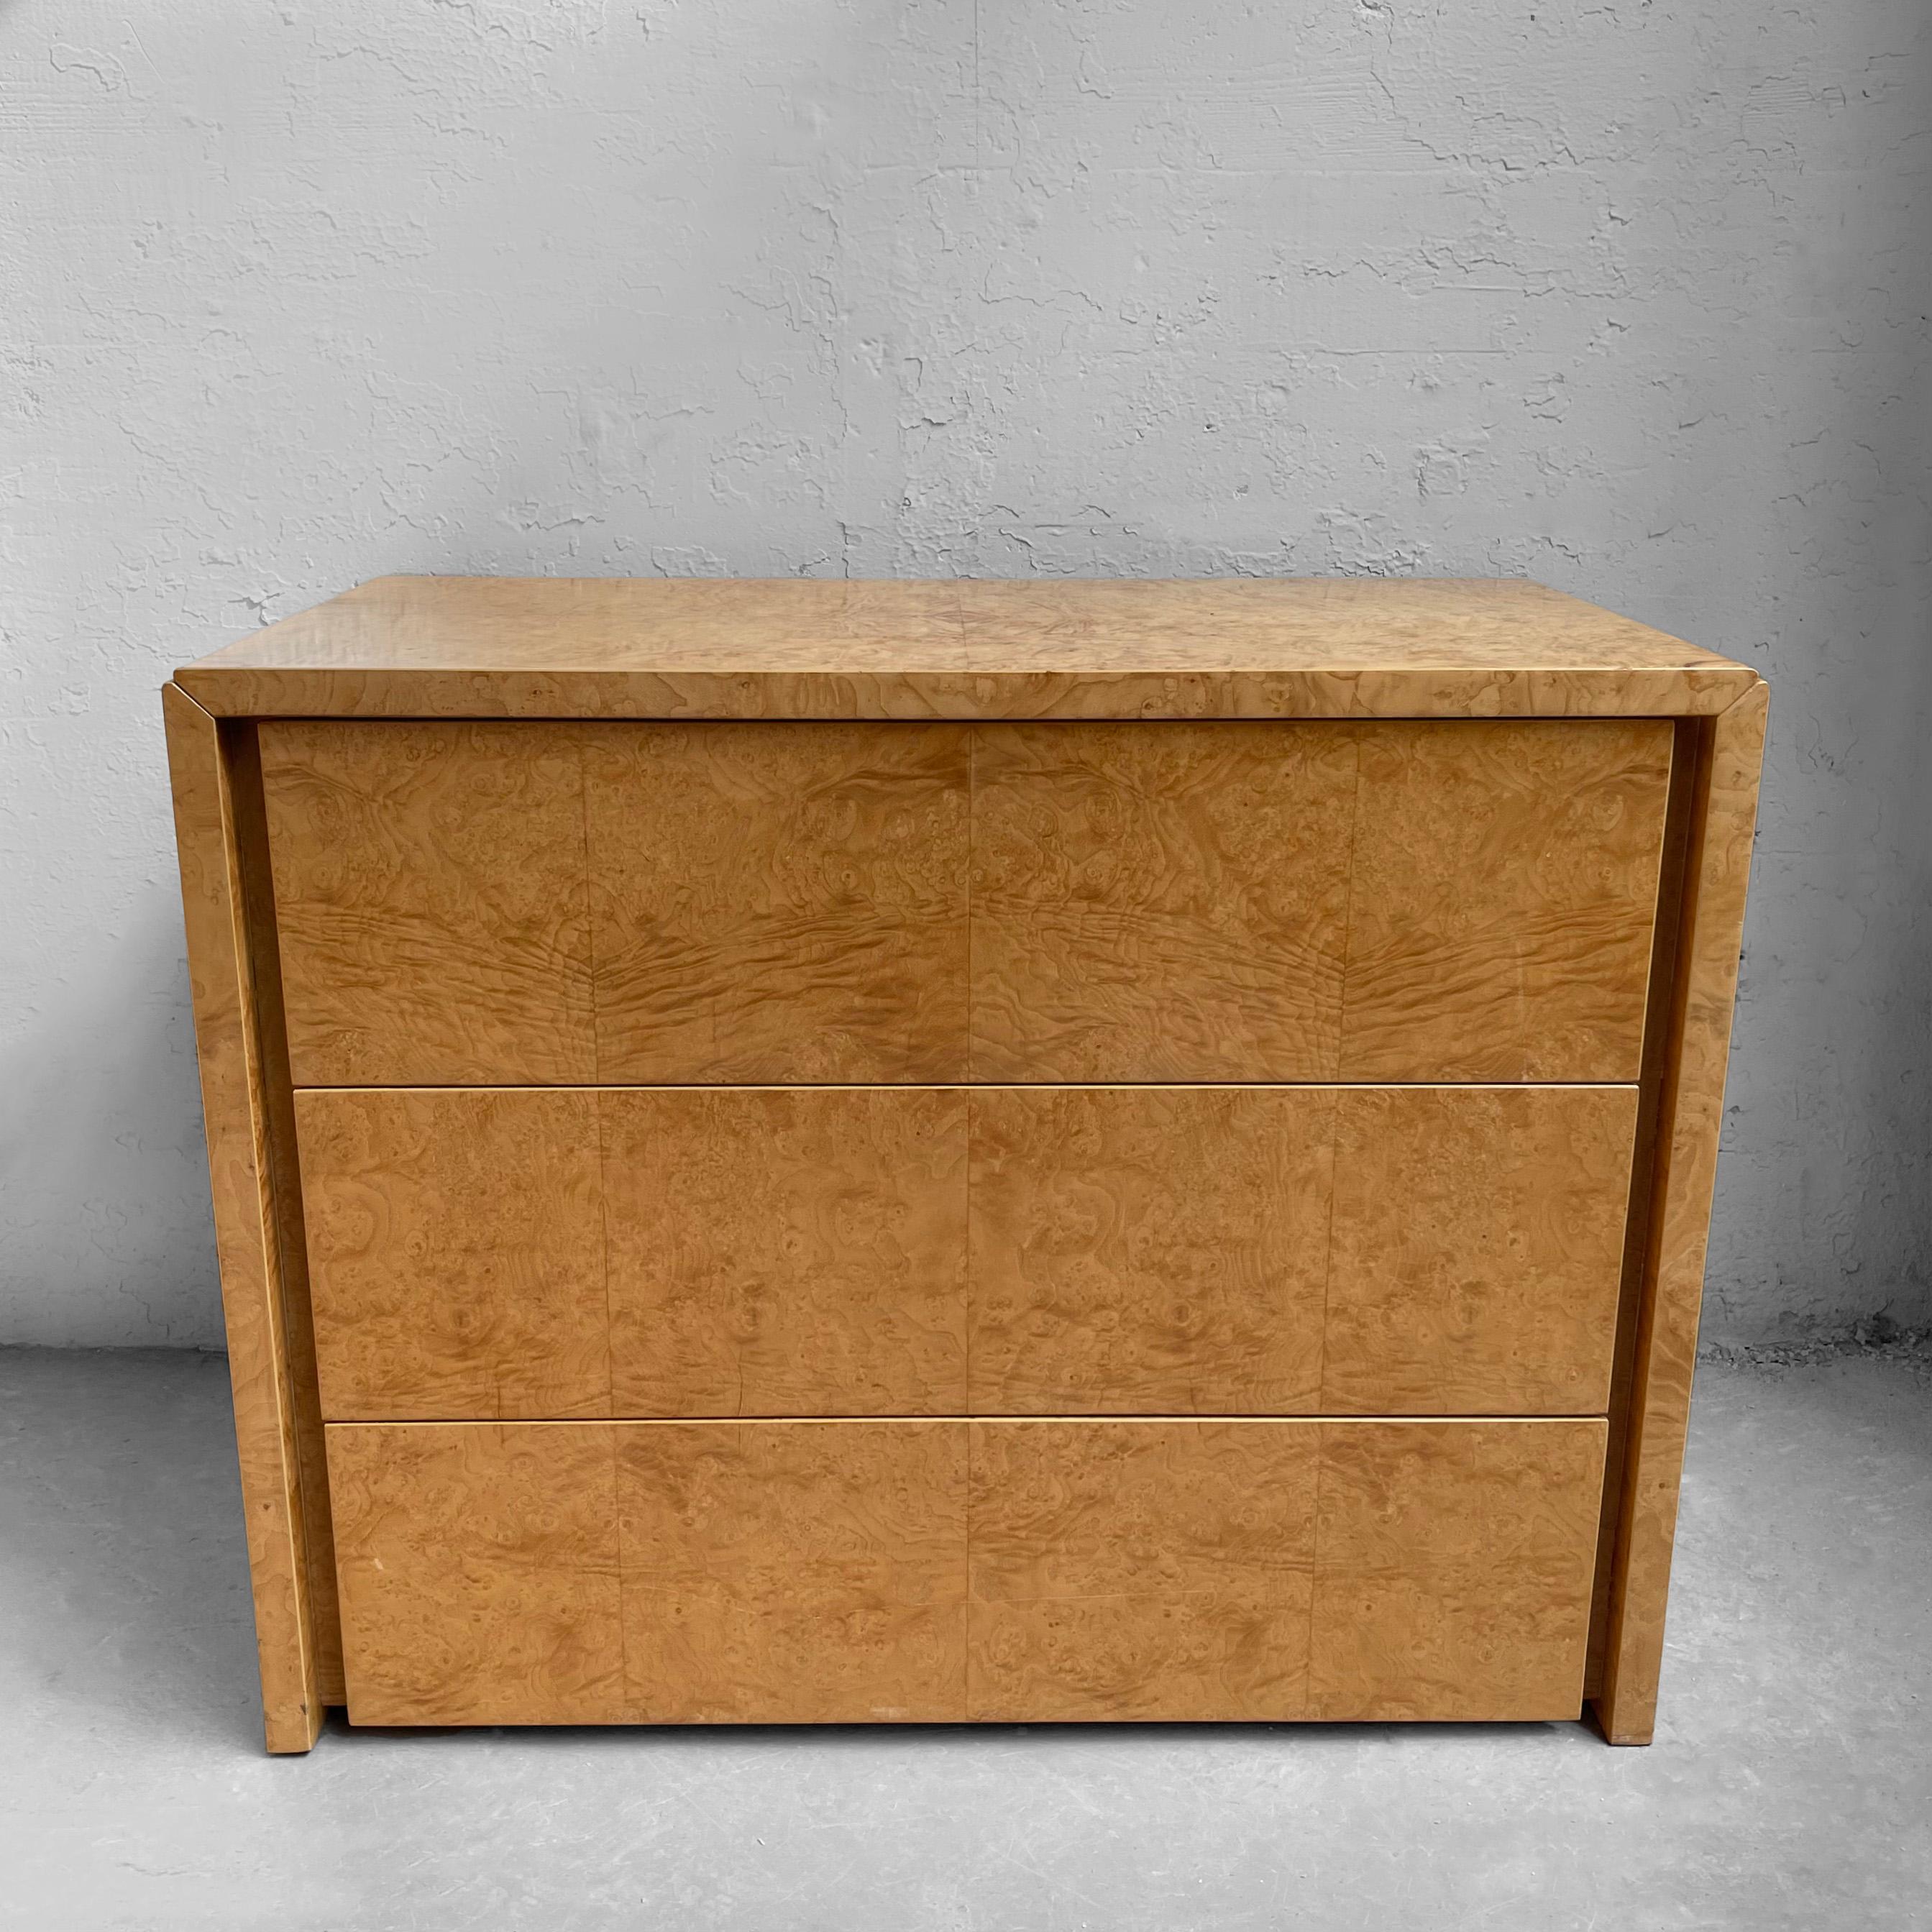 Streamlined, 3 drawer, burl olive wood dresser designed by Spanish architect and industrial designer Paul Mayen for Habitat. The drawers measure 9 inches height.

Mayen's furniture and lighting are in the MOMA permanent design collection and he